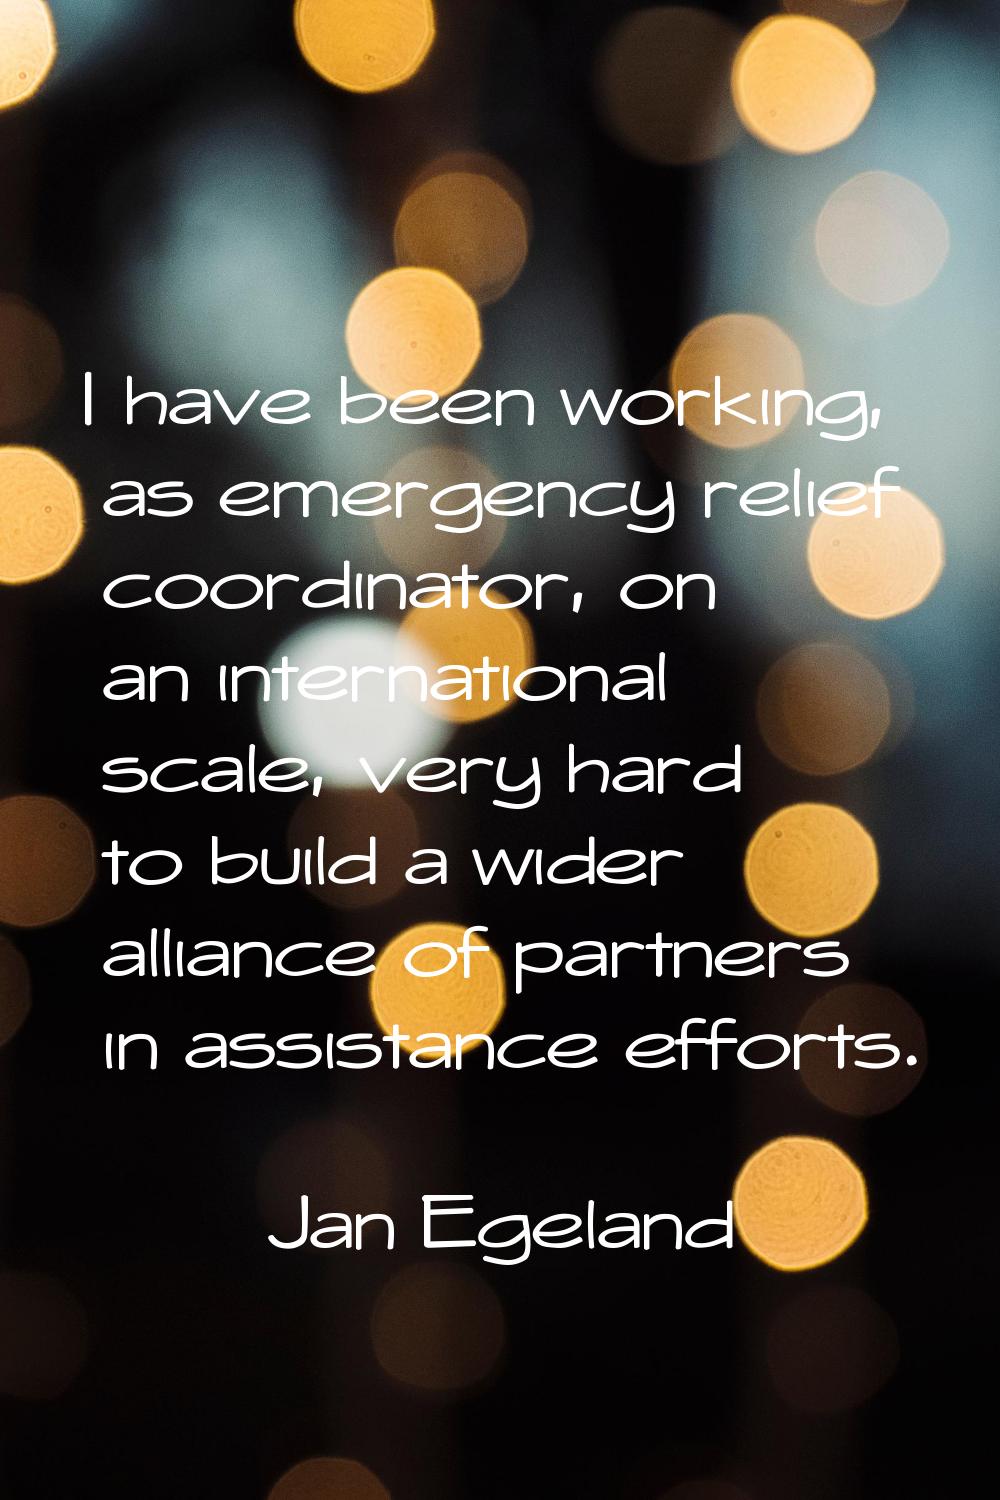 I have been working, as emergency relief coordinator, on an international scale, very hard to build